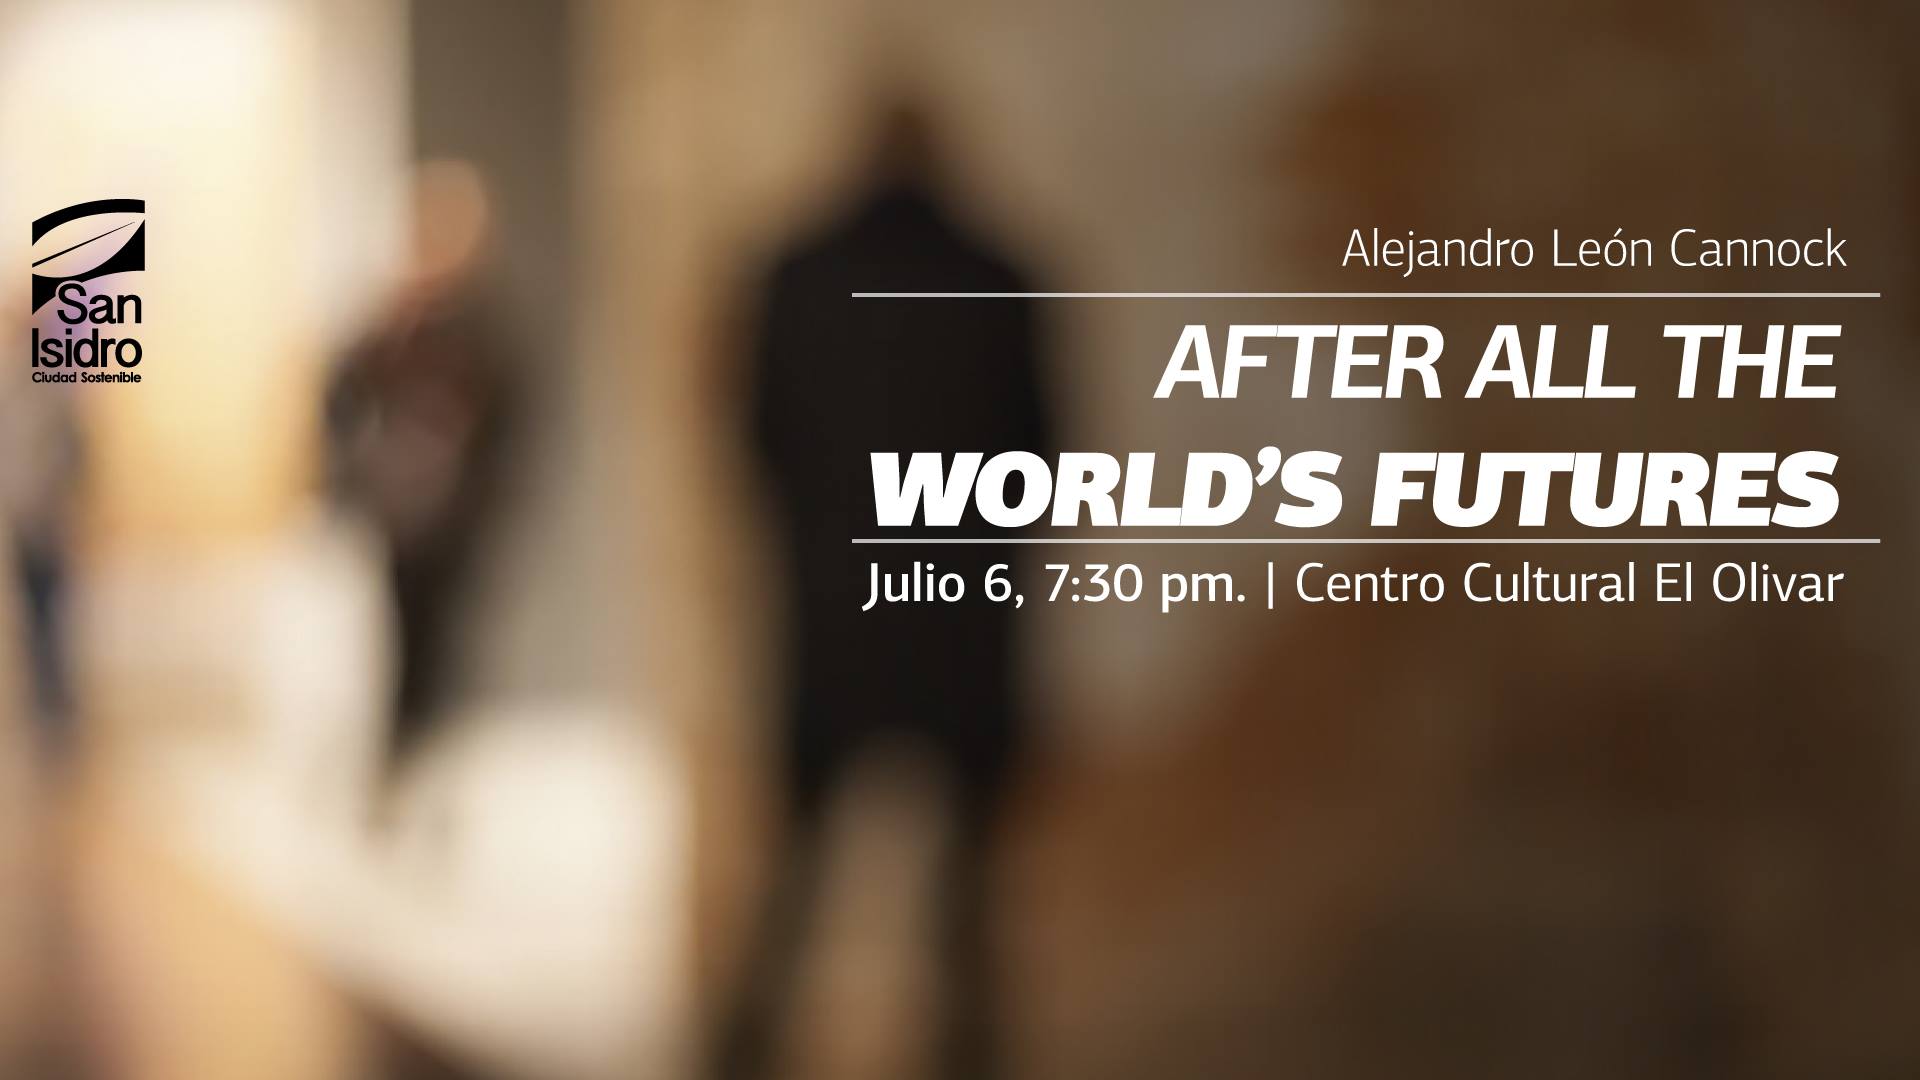 Inauguración: After all the world's futures